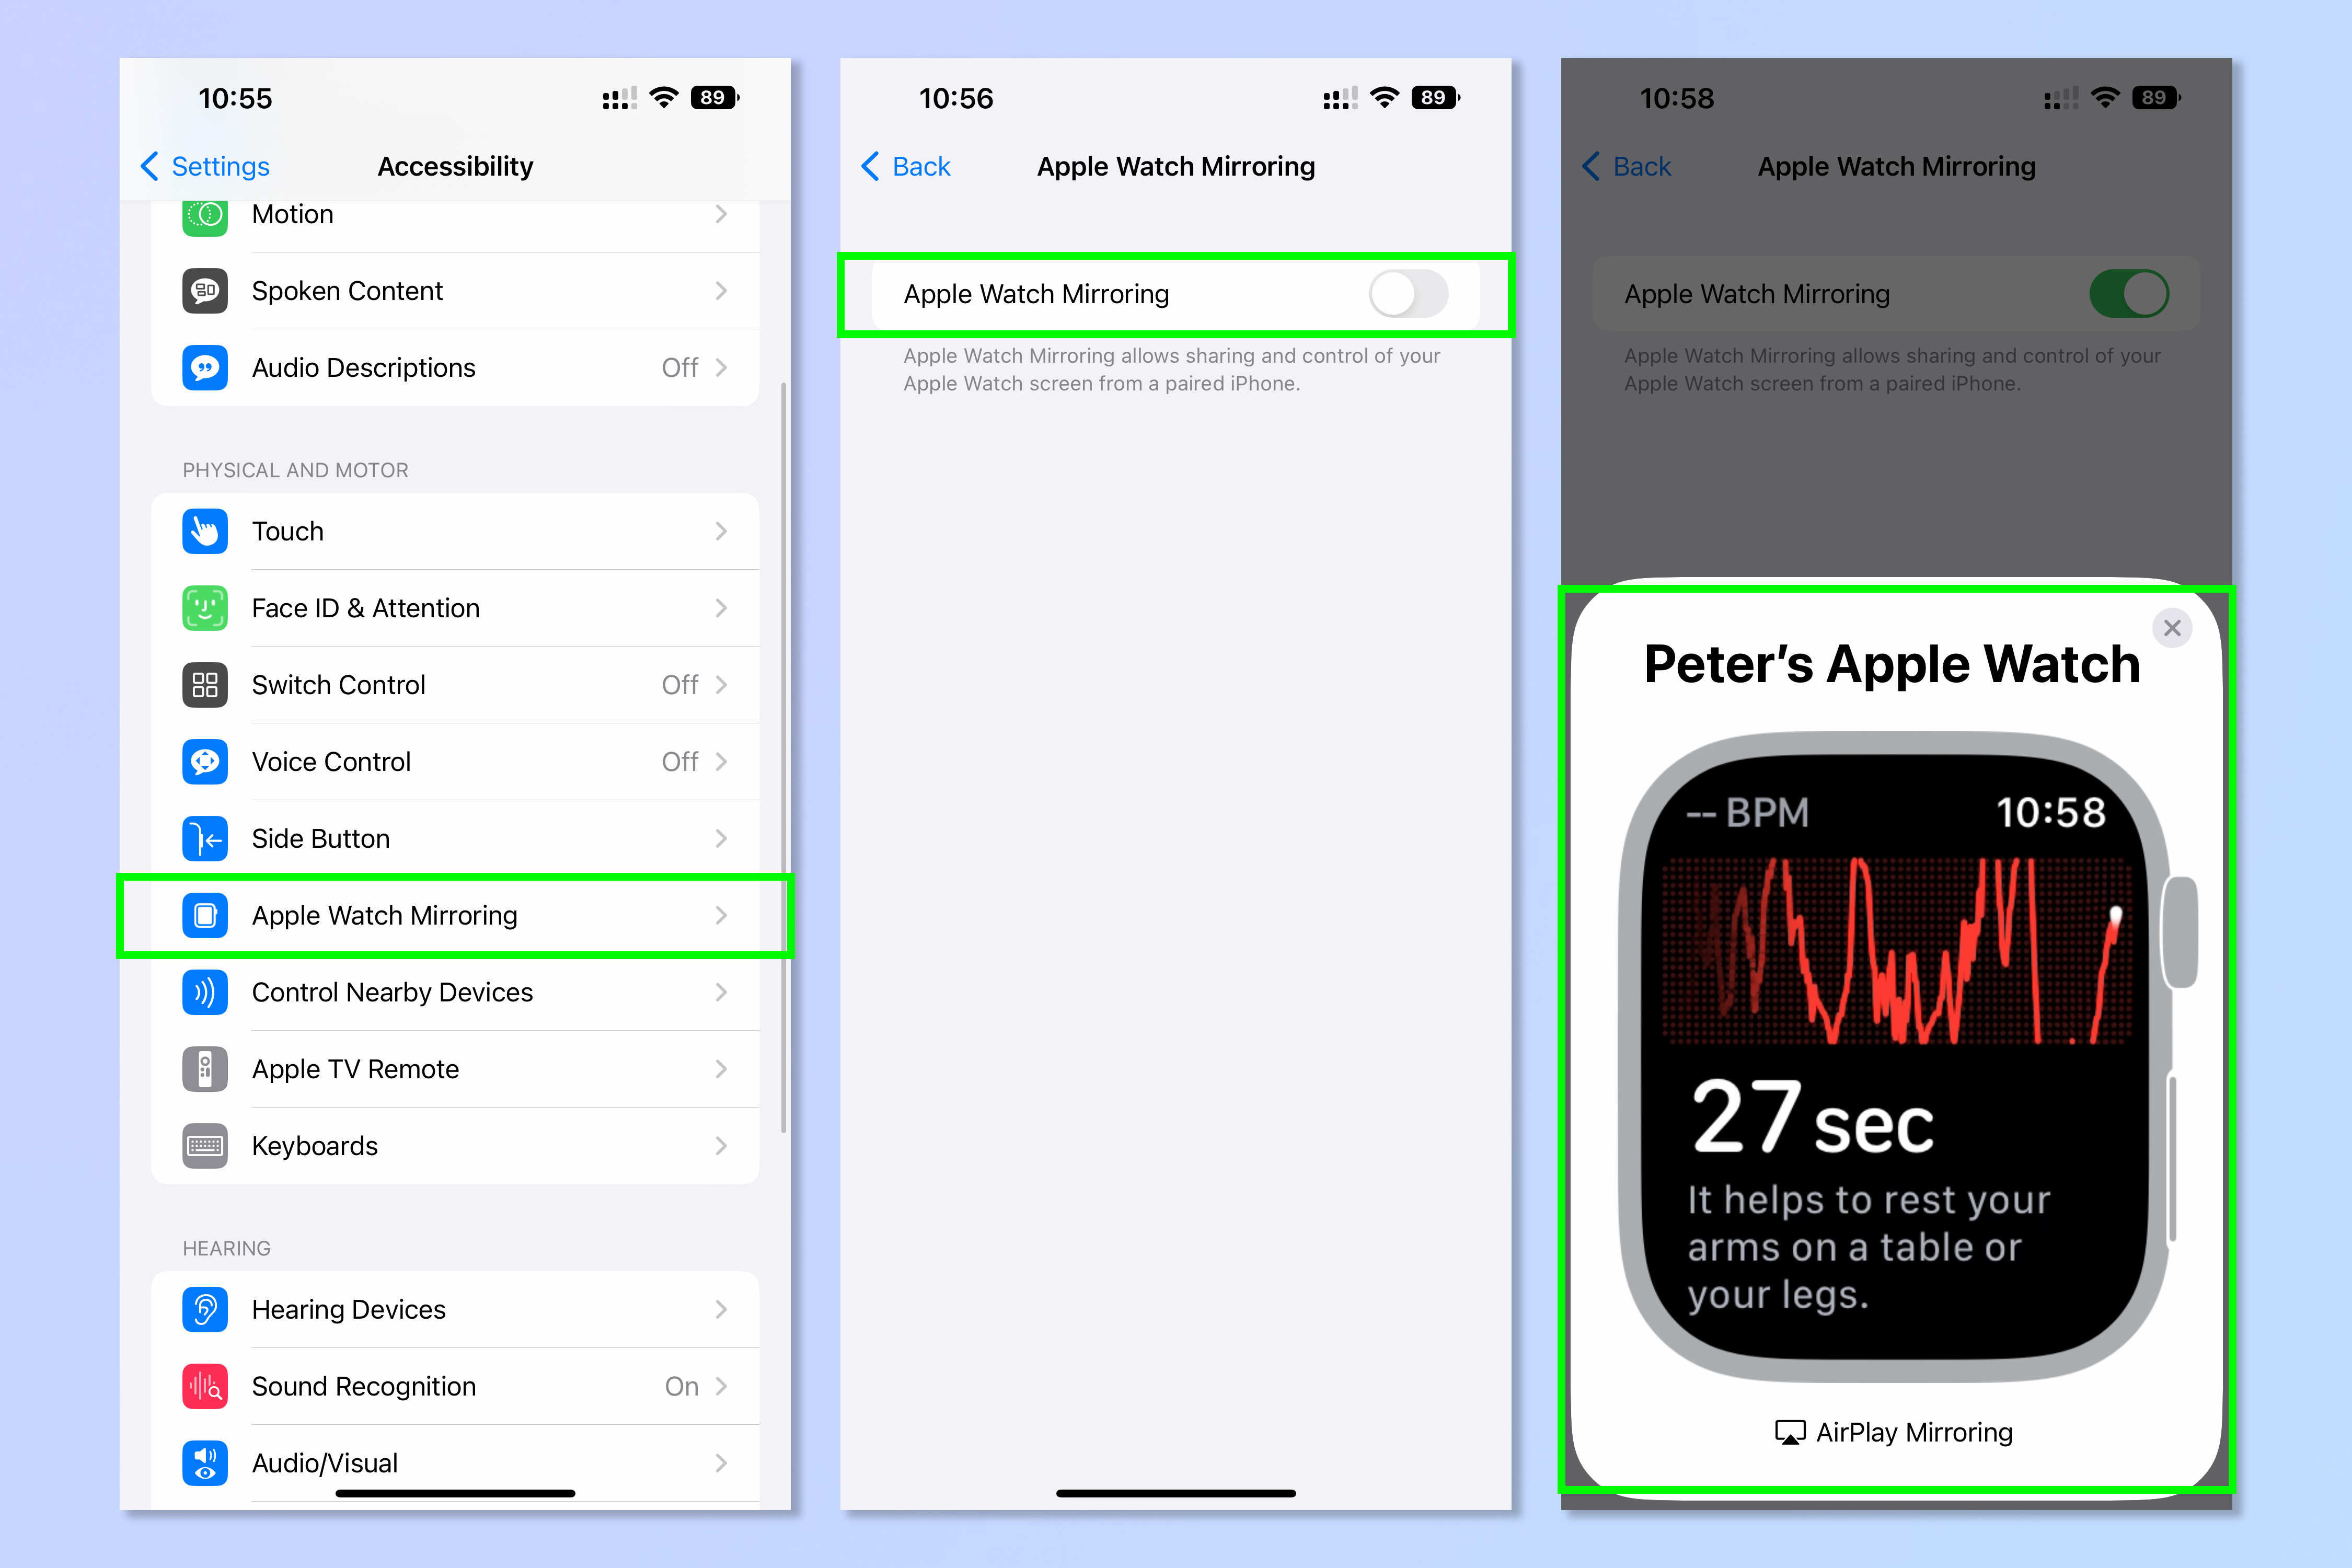 Screenshots showing how to use Apple Watch Mirroring on iOS 16